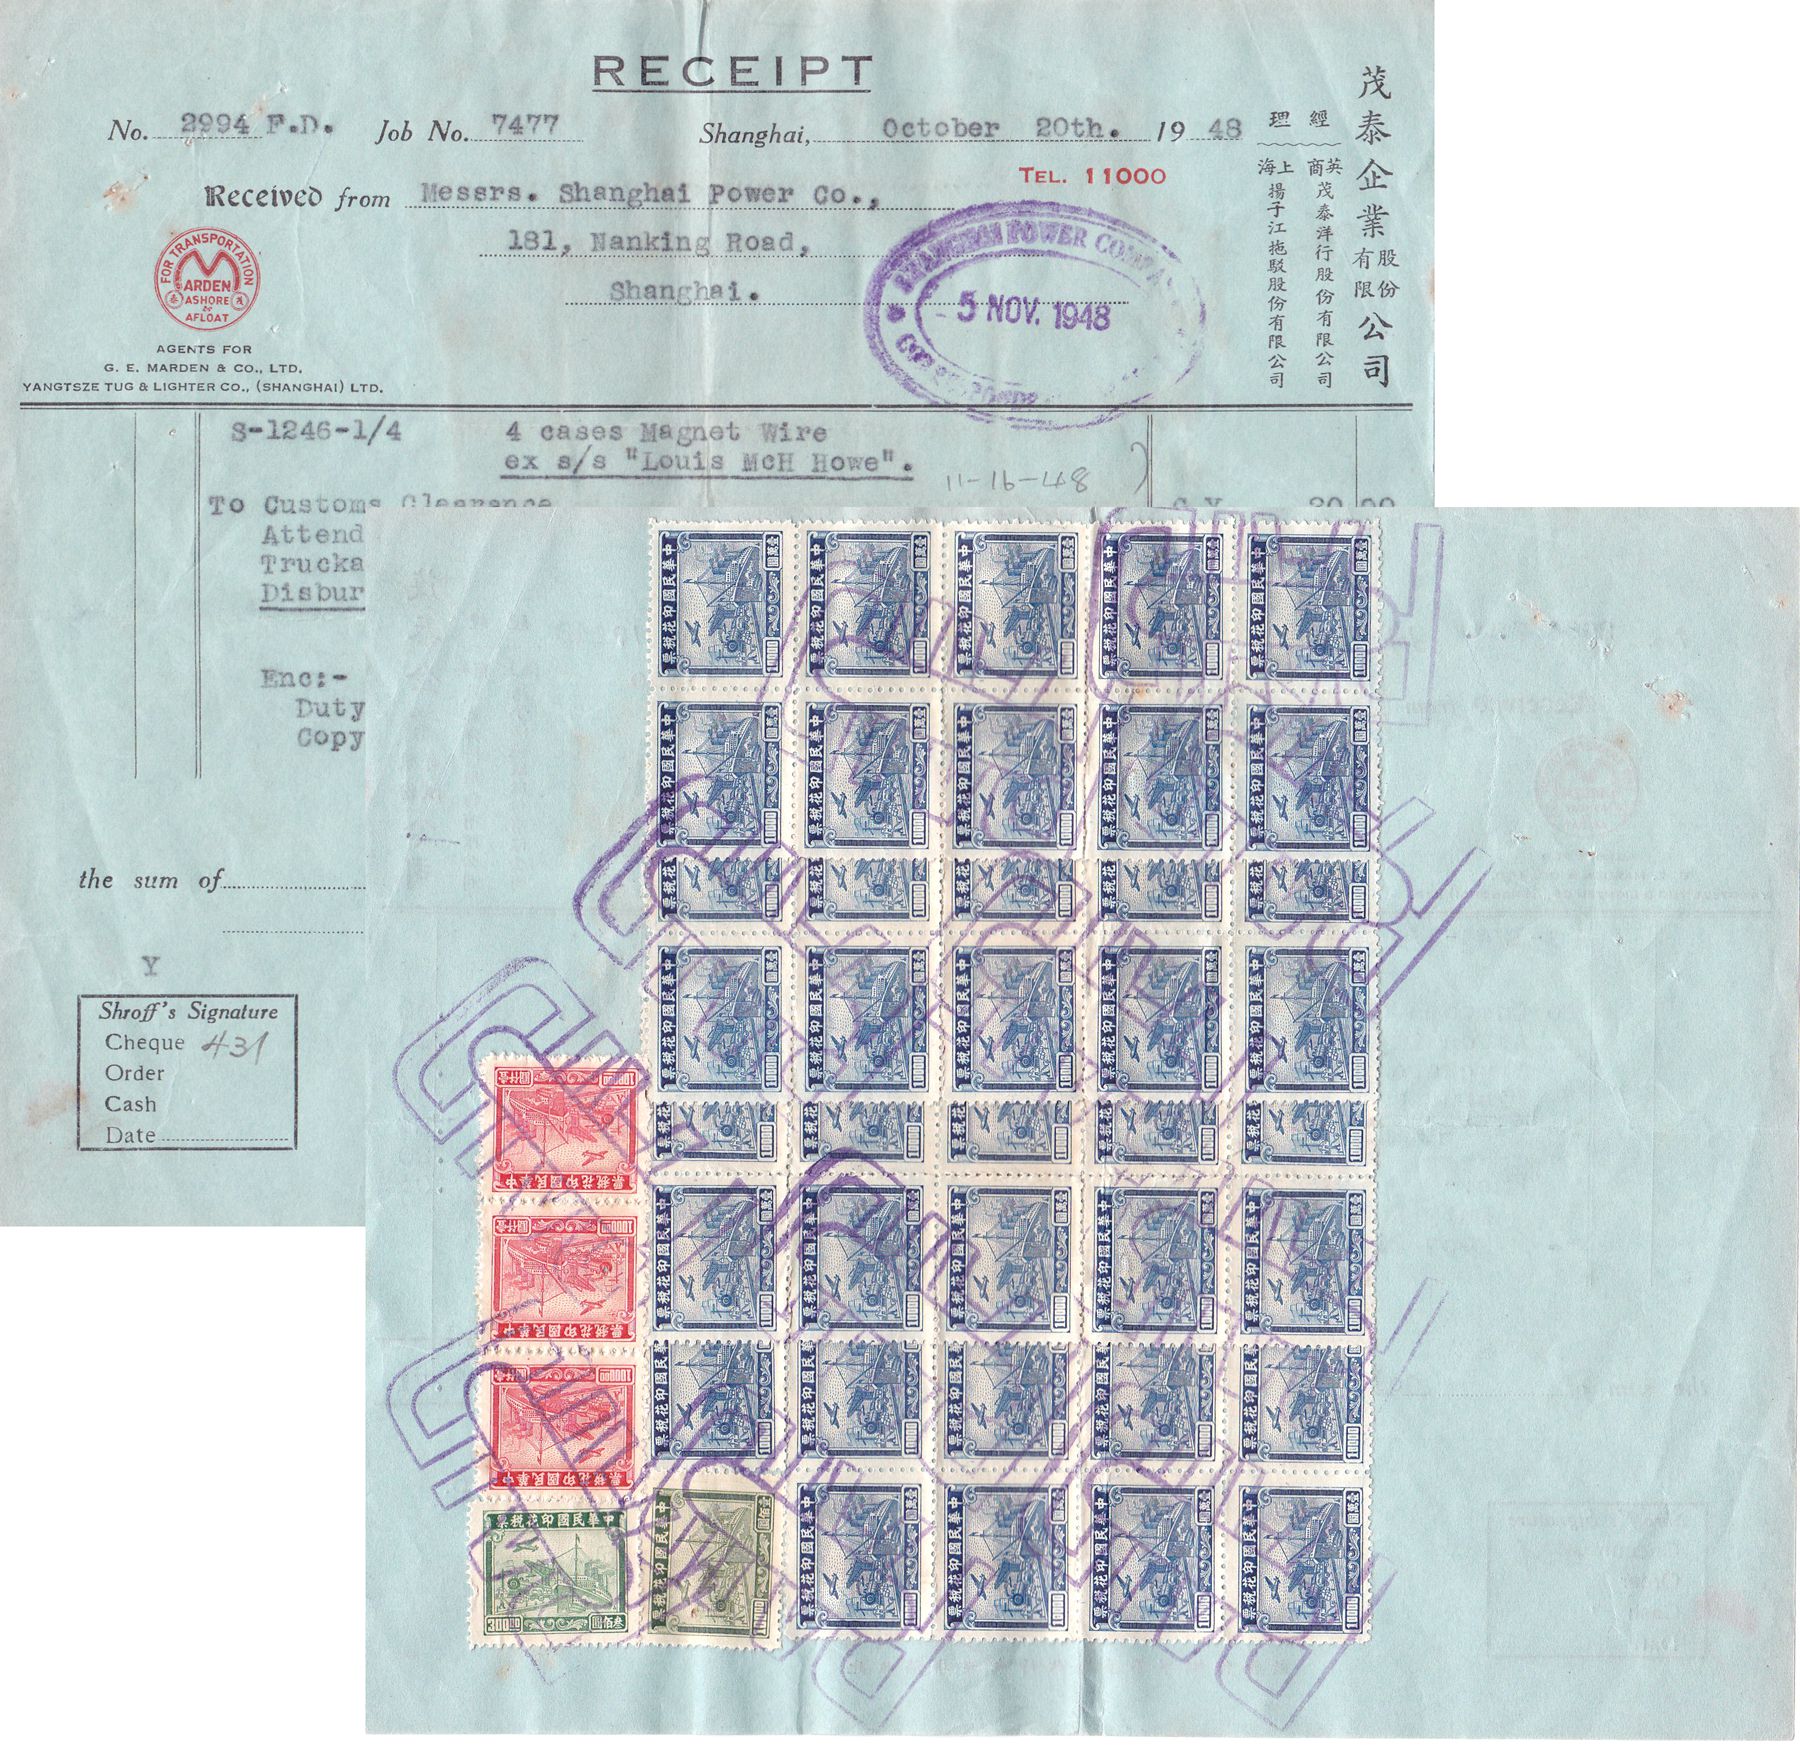 R2918, Shanghai Taimao Co,. Receipt of 1948, with 45 pcs Revenue Stamps